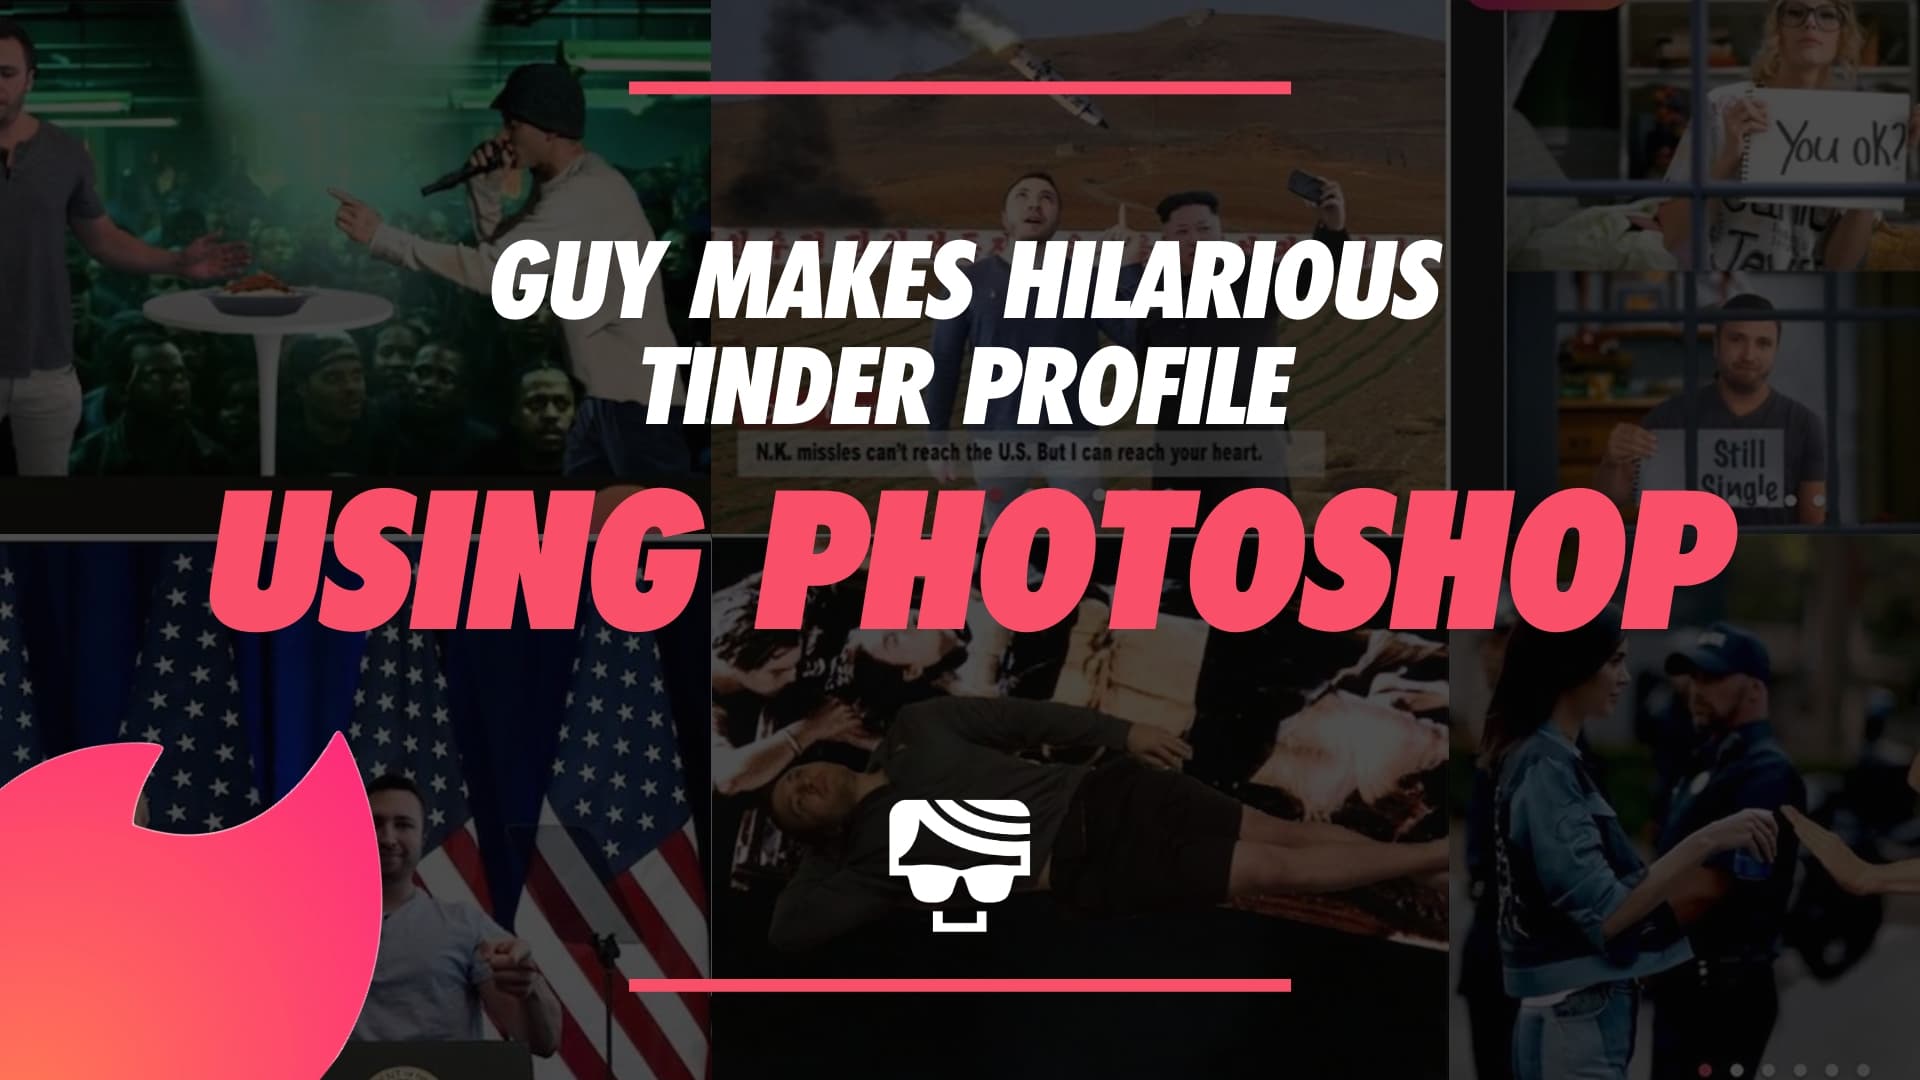 This Genius Photoshopped All His Tinder Photos For A Hilarious Profile